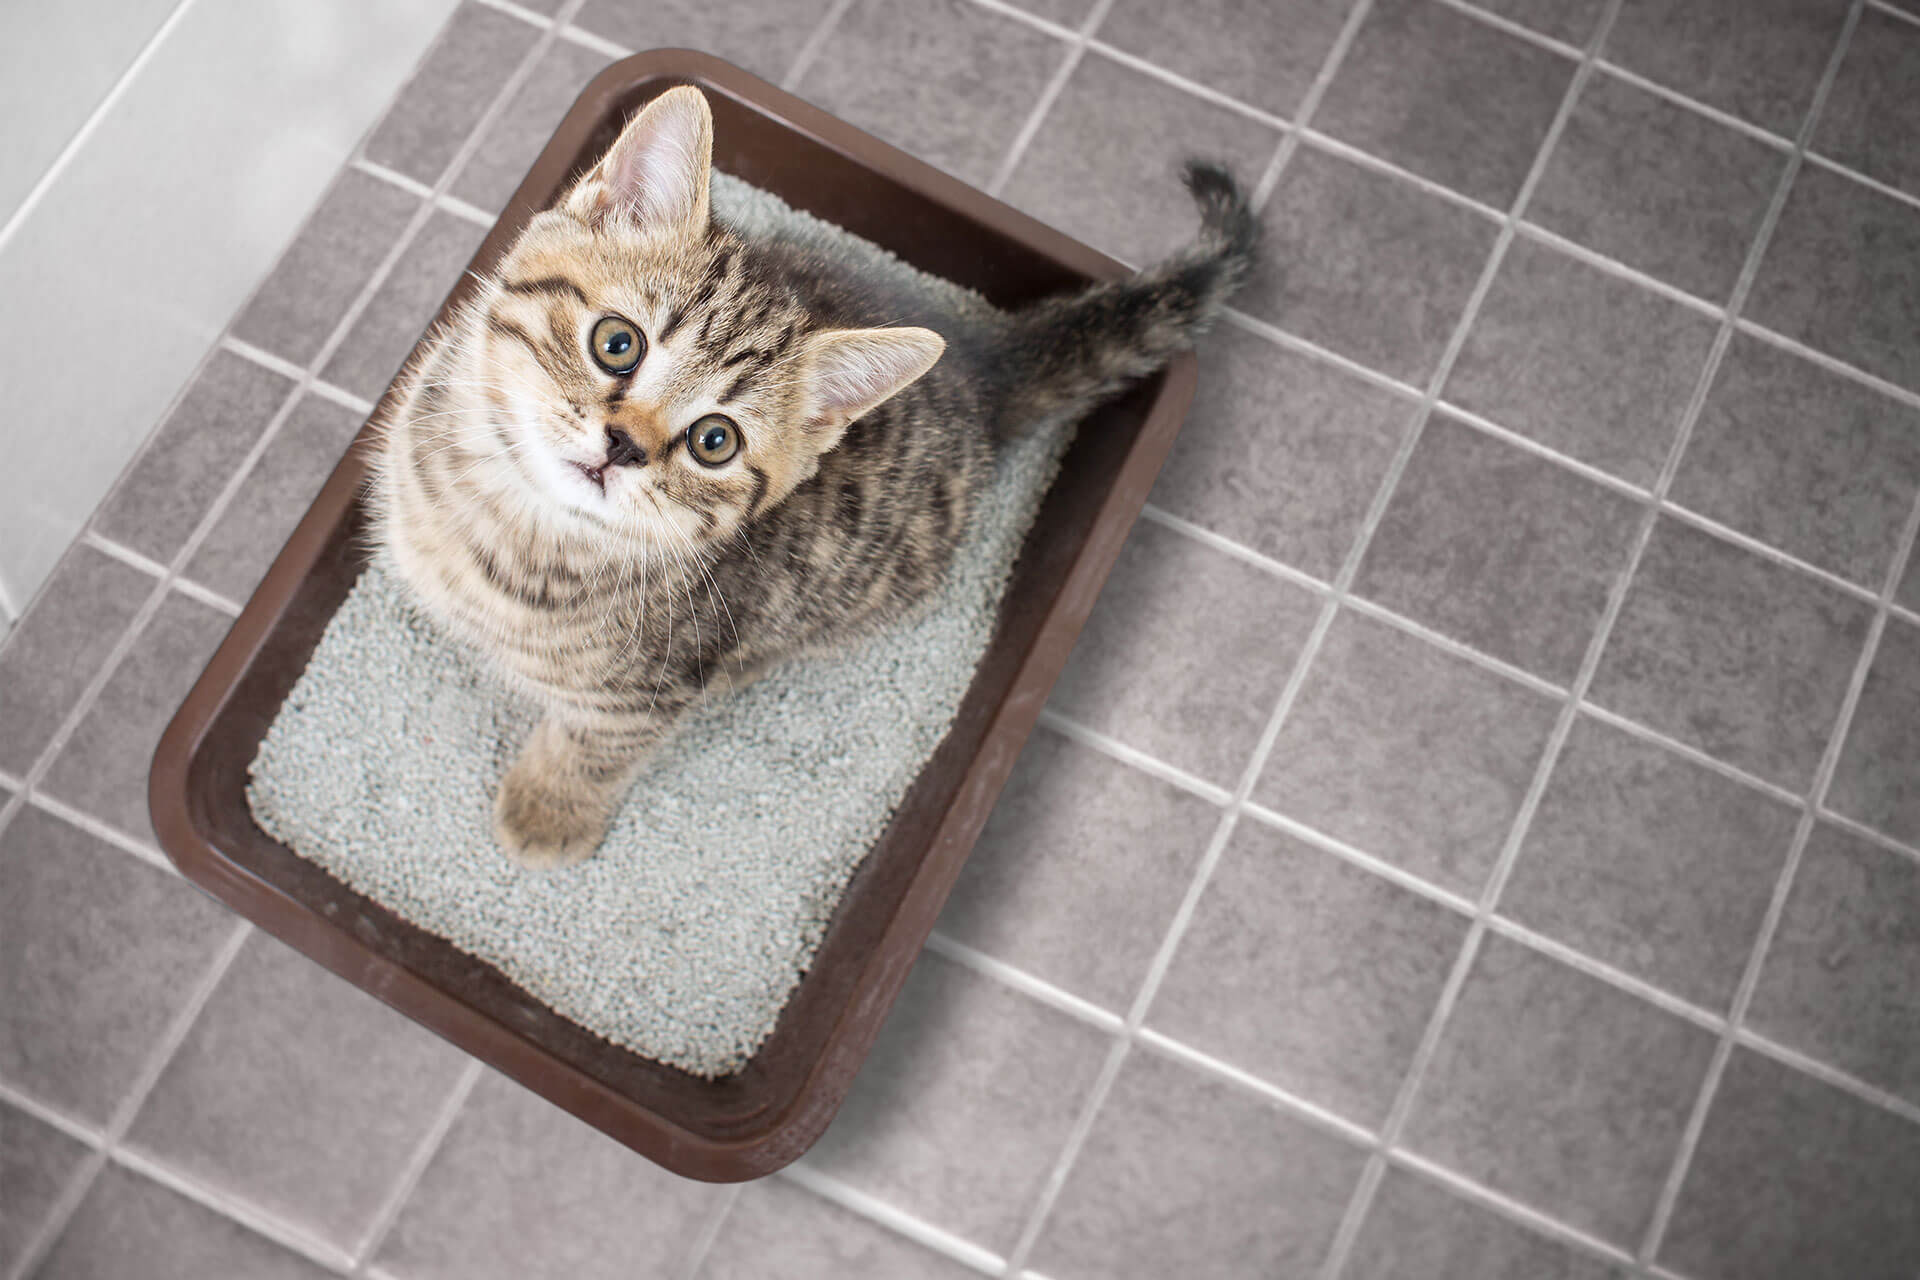 Ranking the best cat litter cleaners for 2022